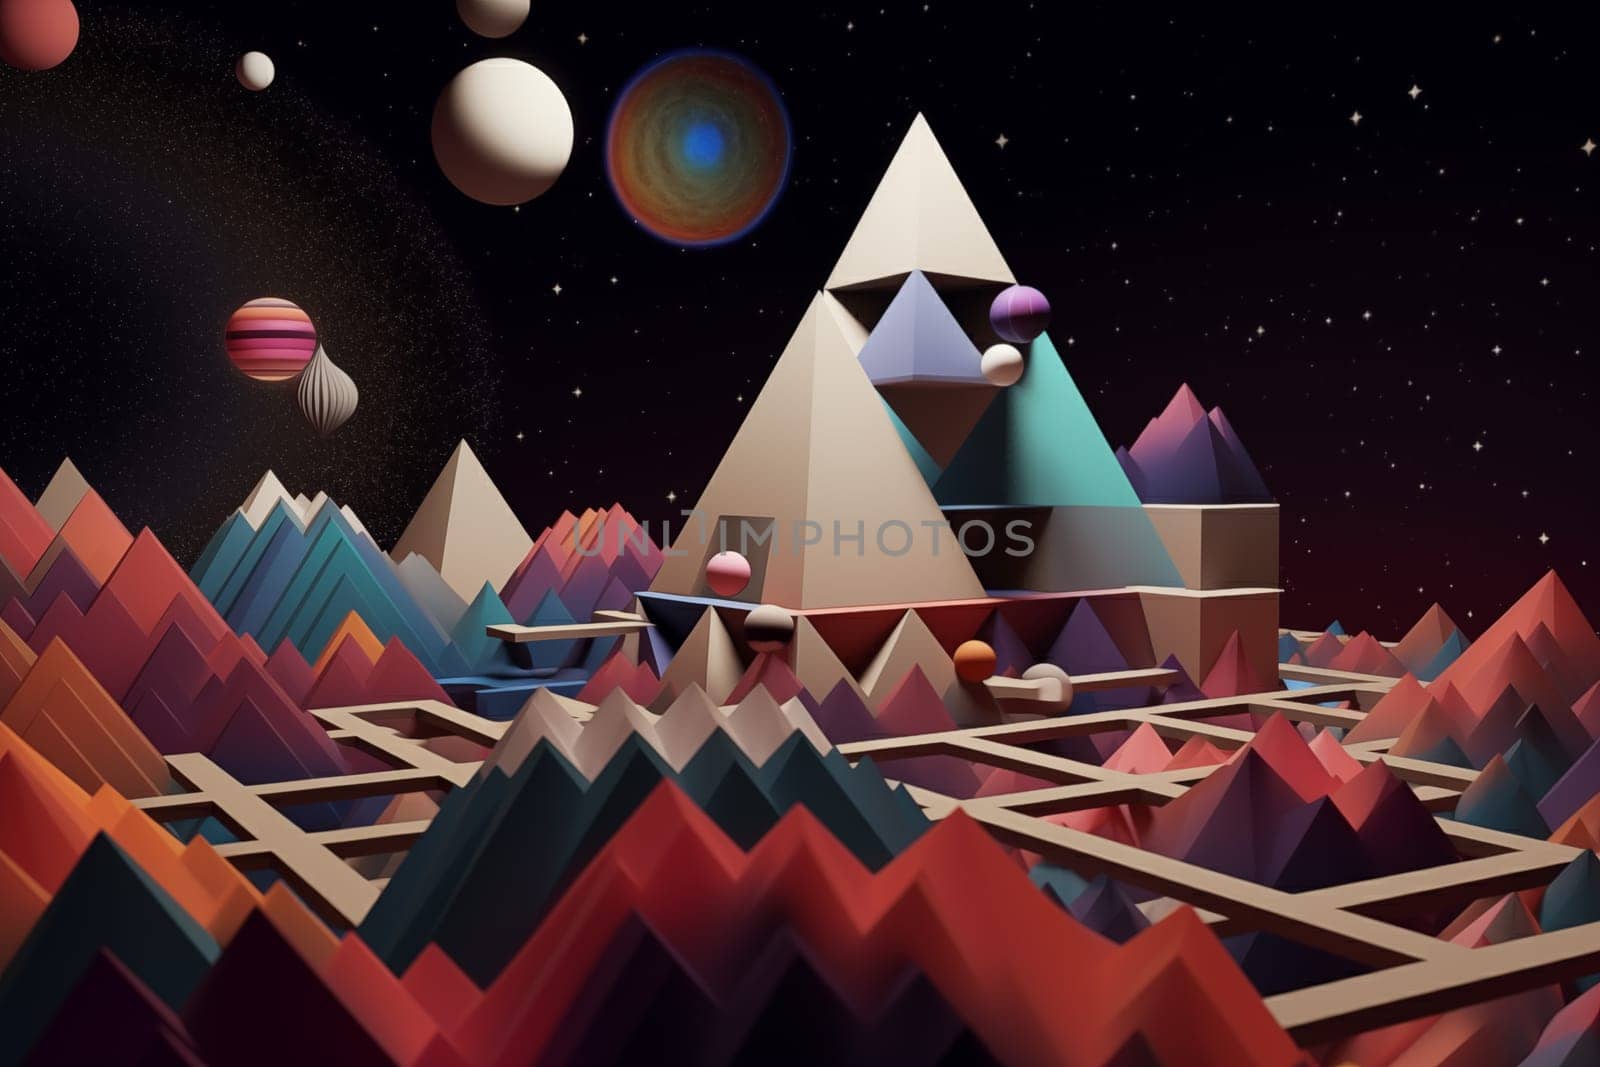 Аbstract geometric shapes and structures with a cosmic and surreal touch, set against starry space backdrops.Abstract Cosmic Geometry